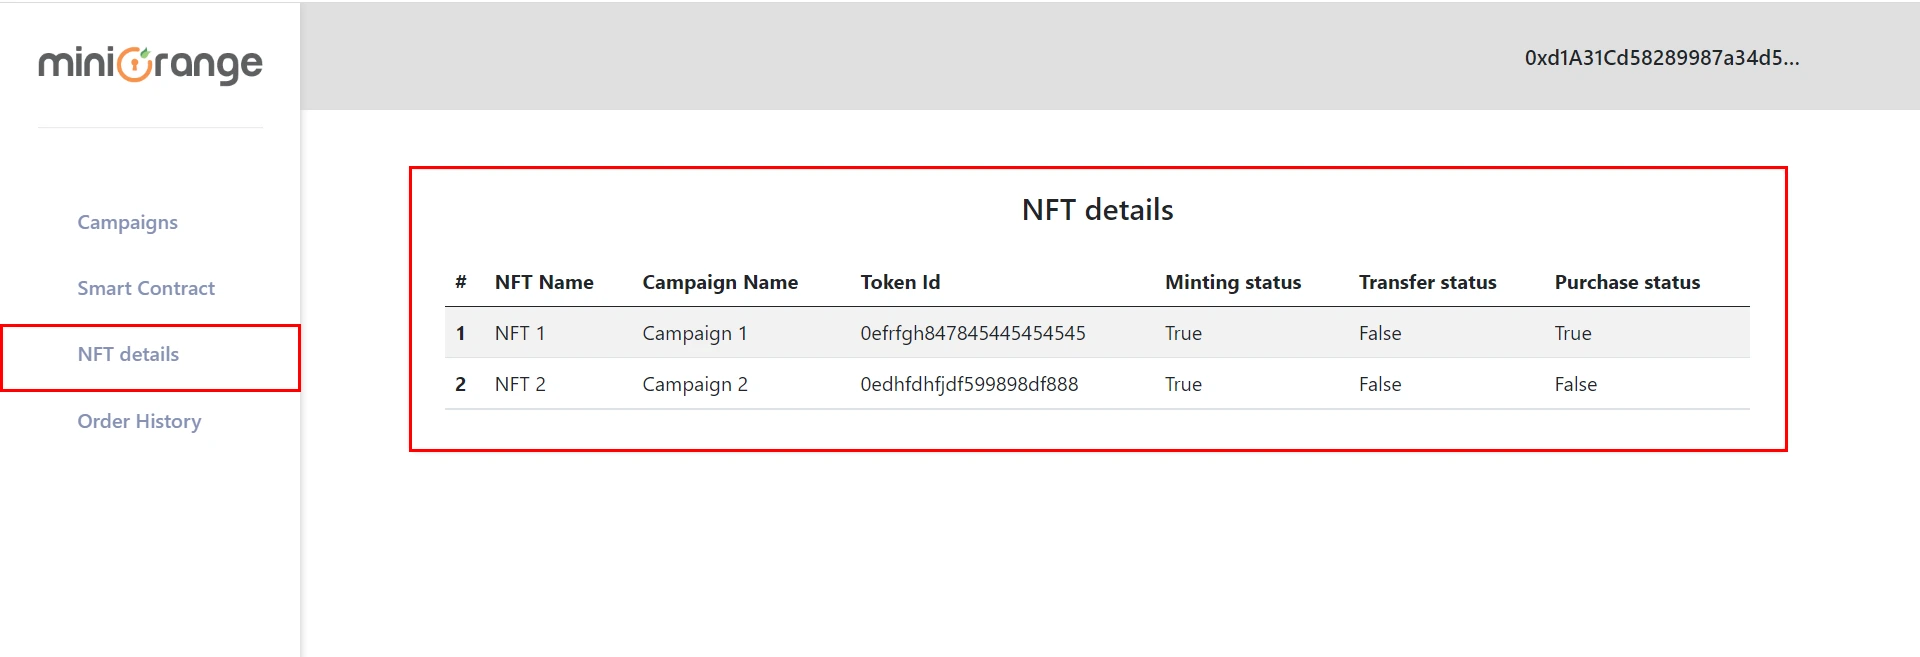 Shopify NFT minting setup guide - view info about NFT